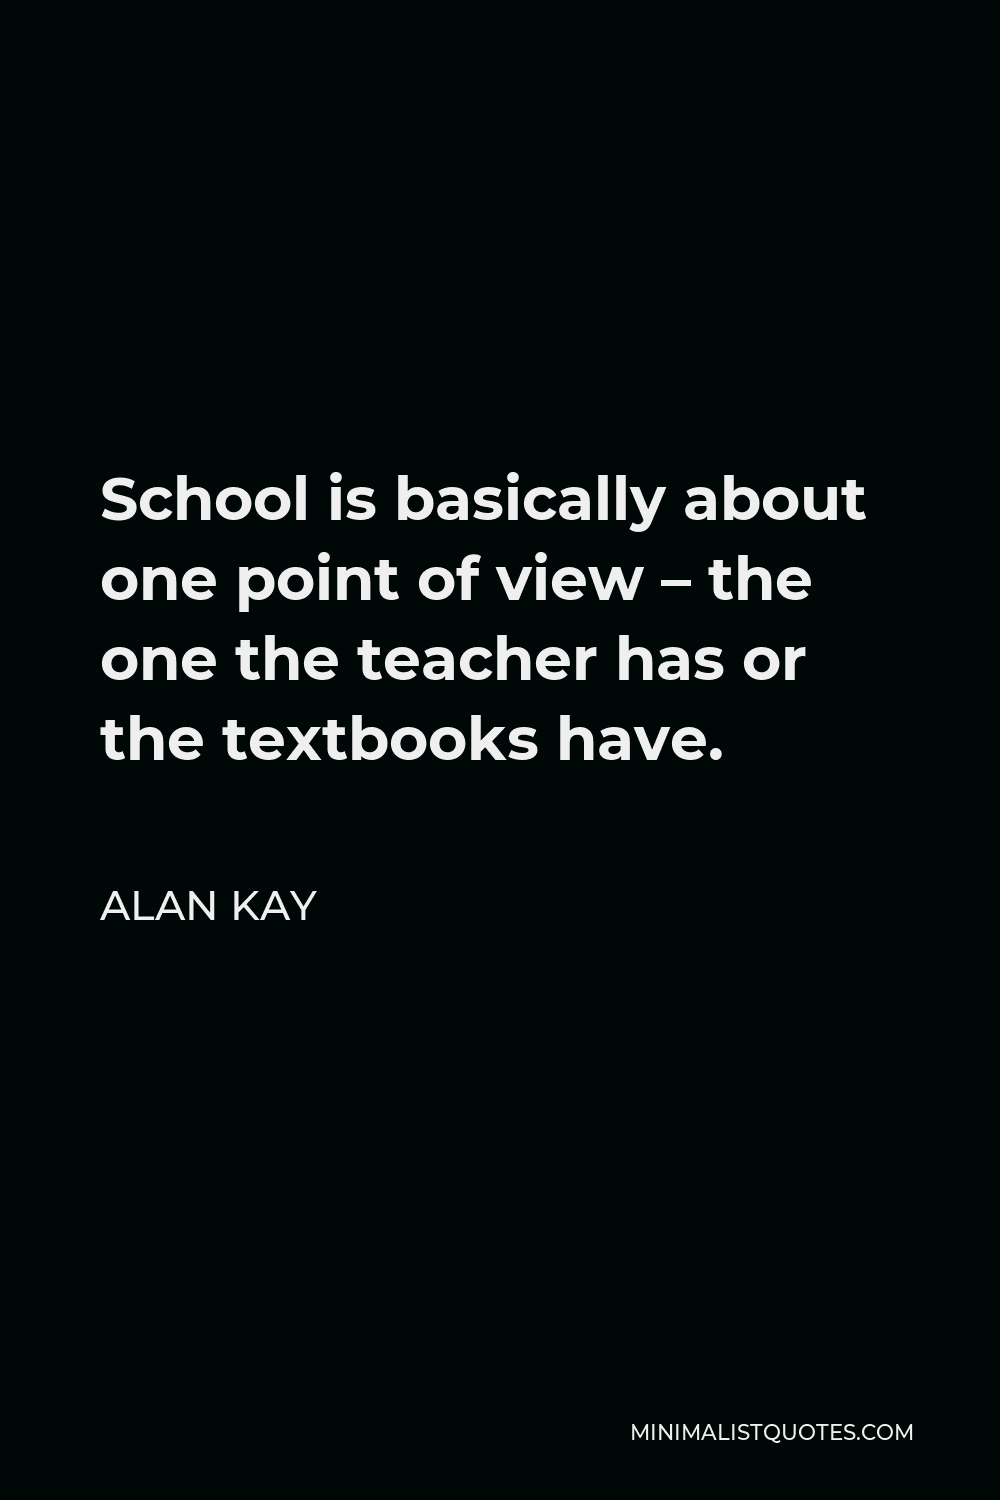 Alan Kay Quote - School is basically about one point of view – the one the teacher has or the textbooks have.